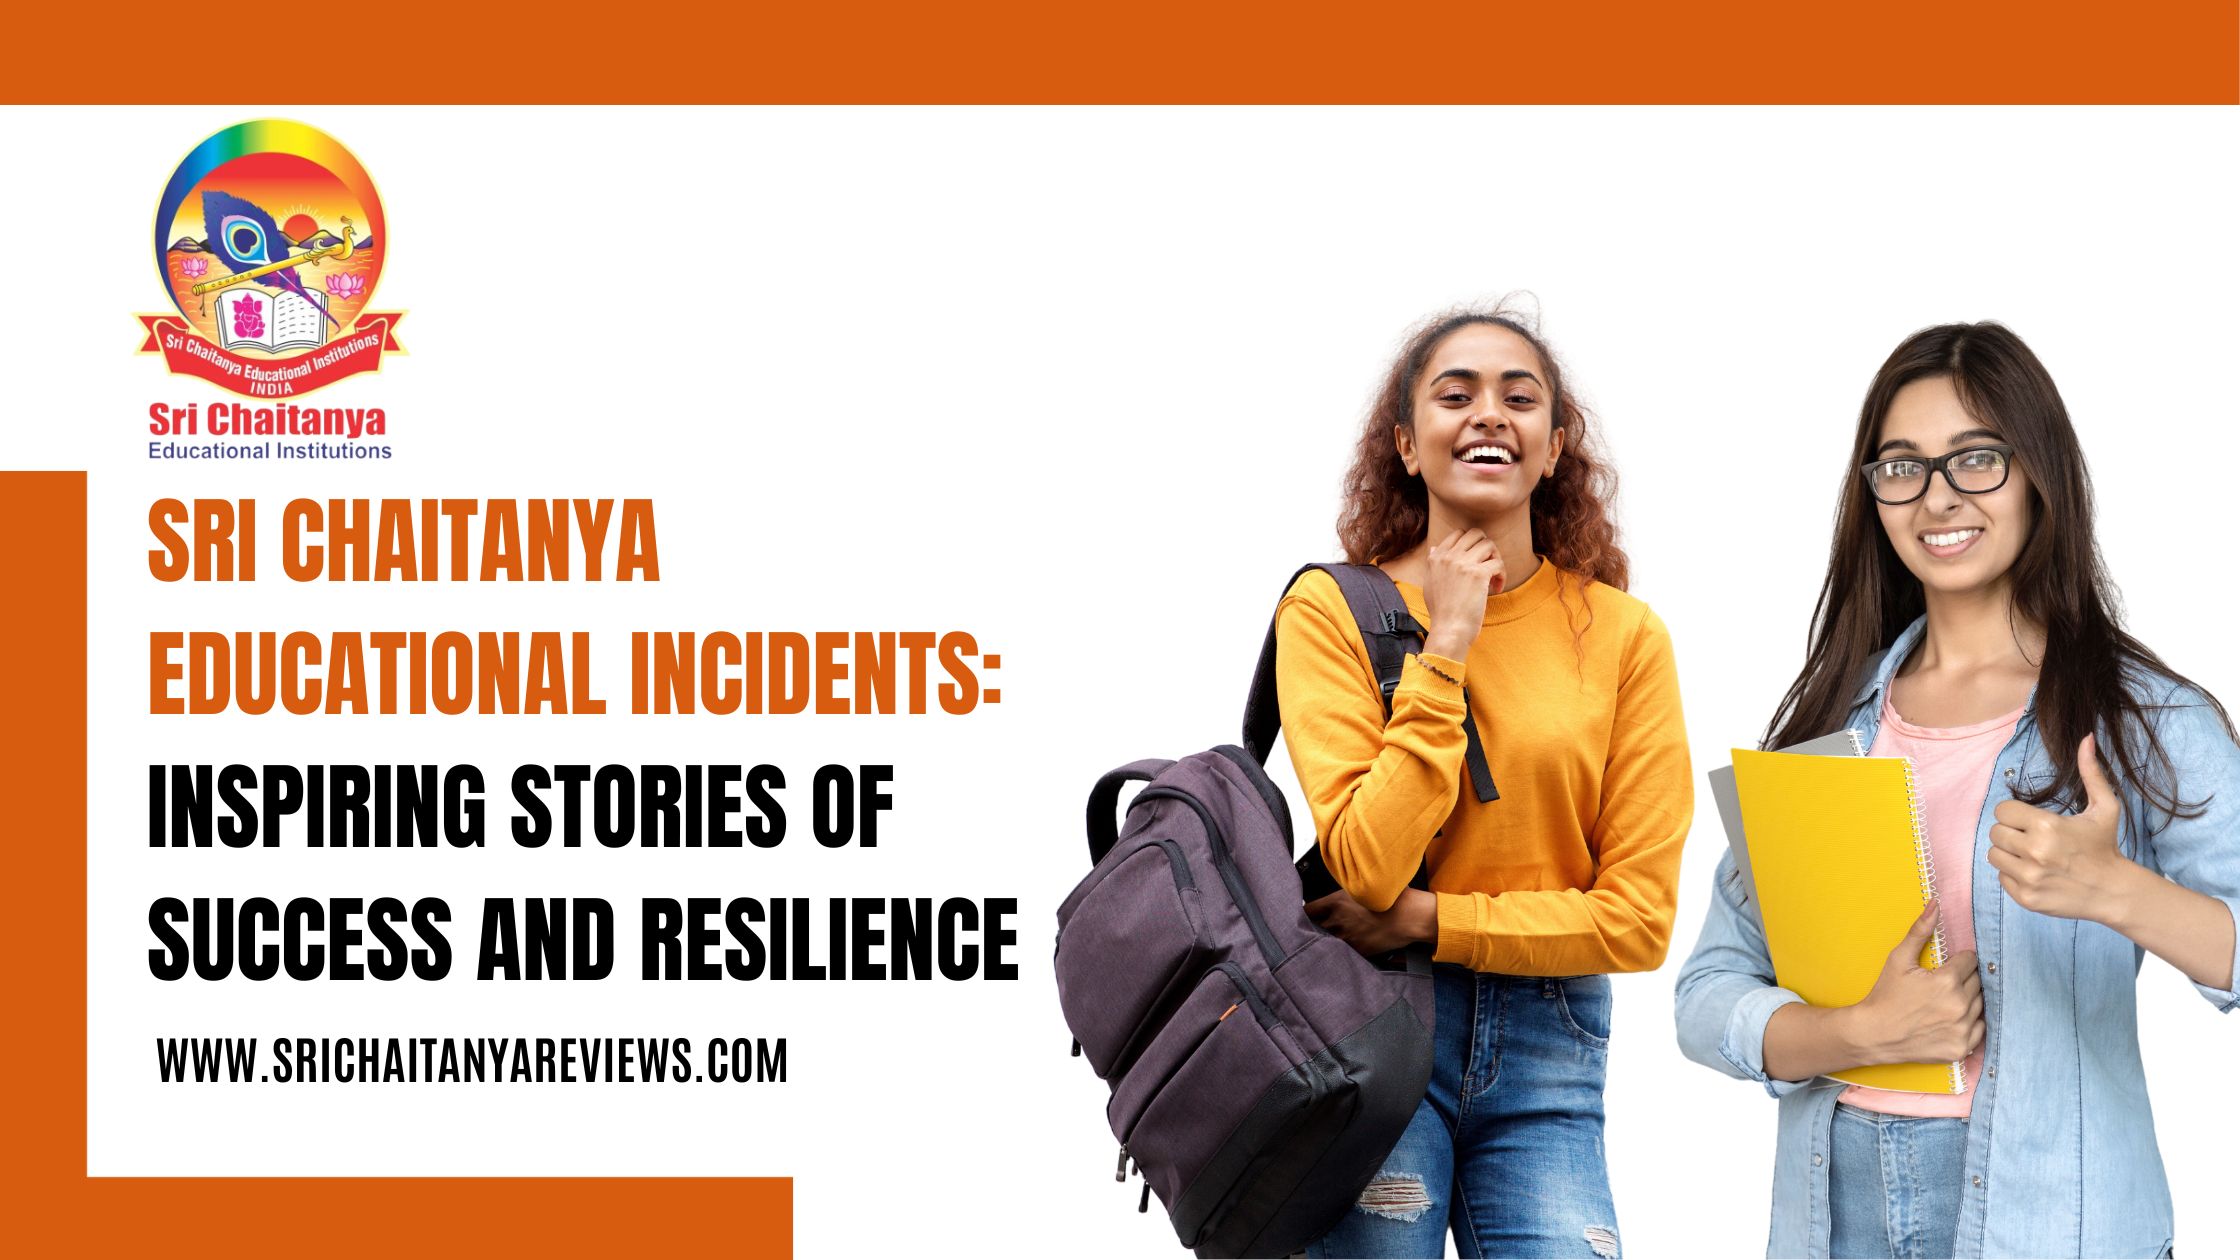 Sri Chaitanya Educational Incidents: Inspiring Stories of Success and Resilience